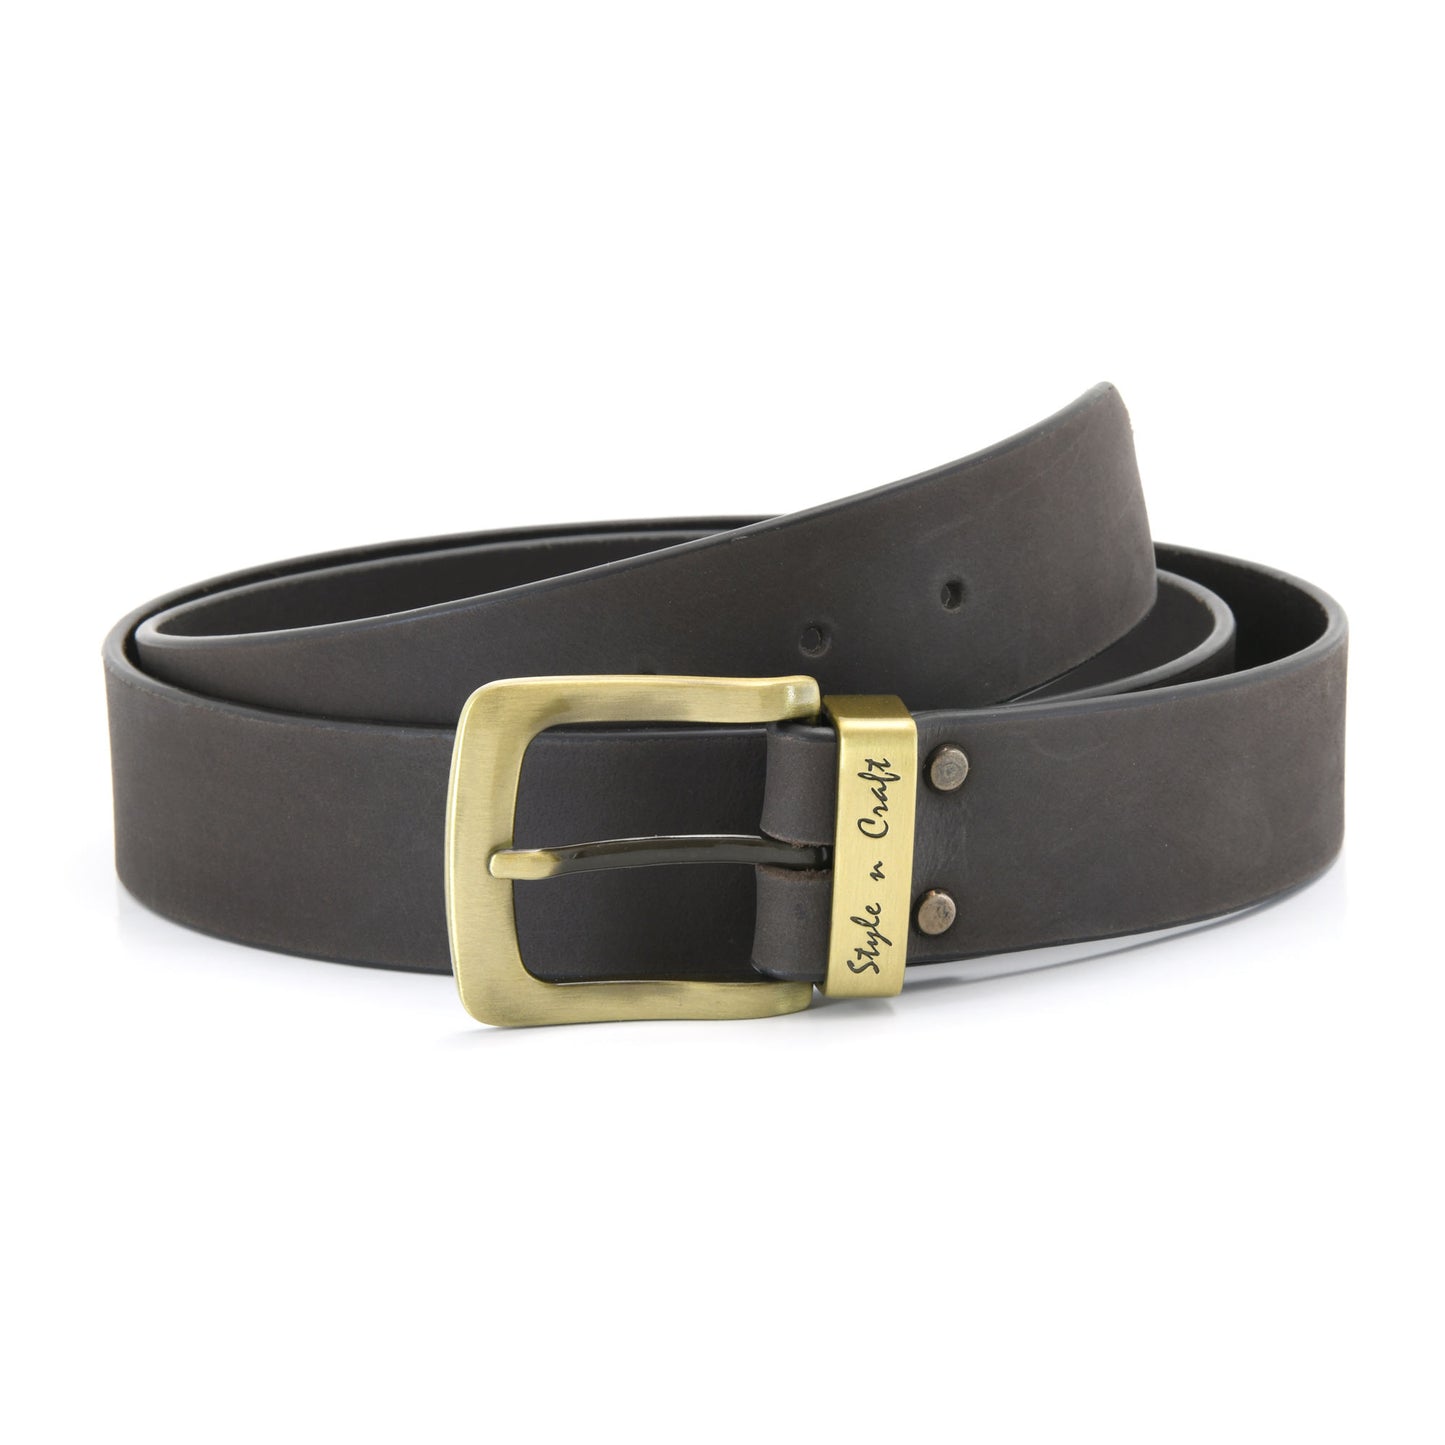 392712 - one and a half inch wide leather belt in dark brown color full grain leather with matte gold finish metal buckle & loop - front view 1